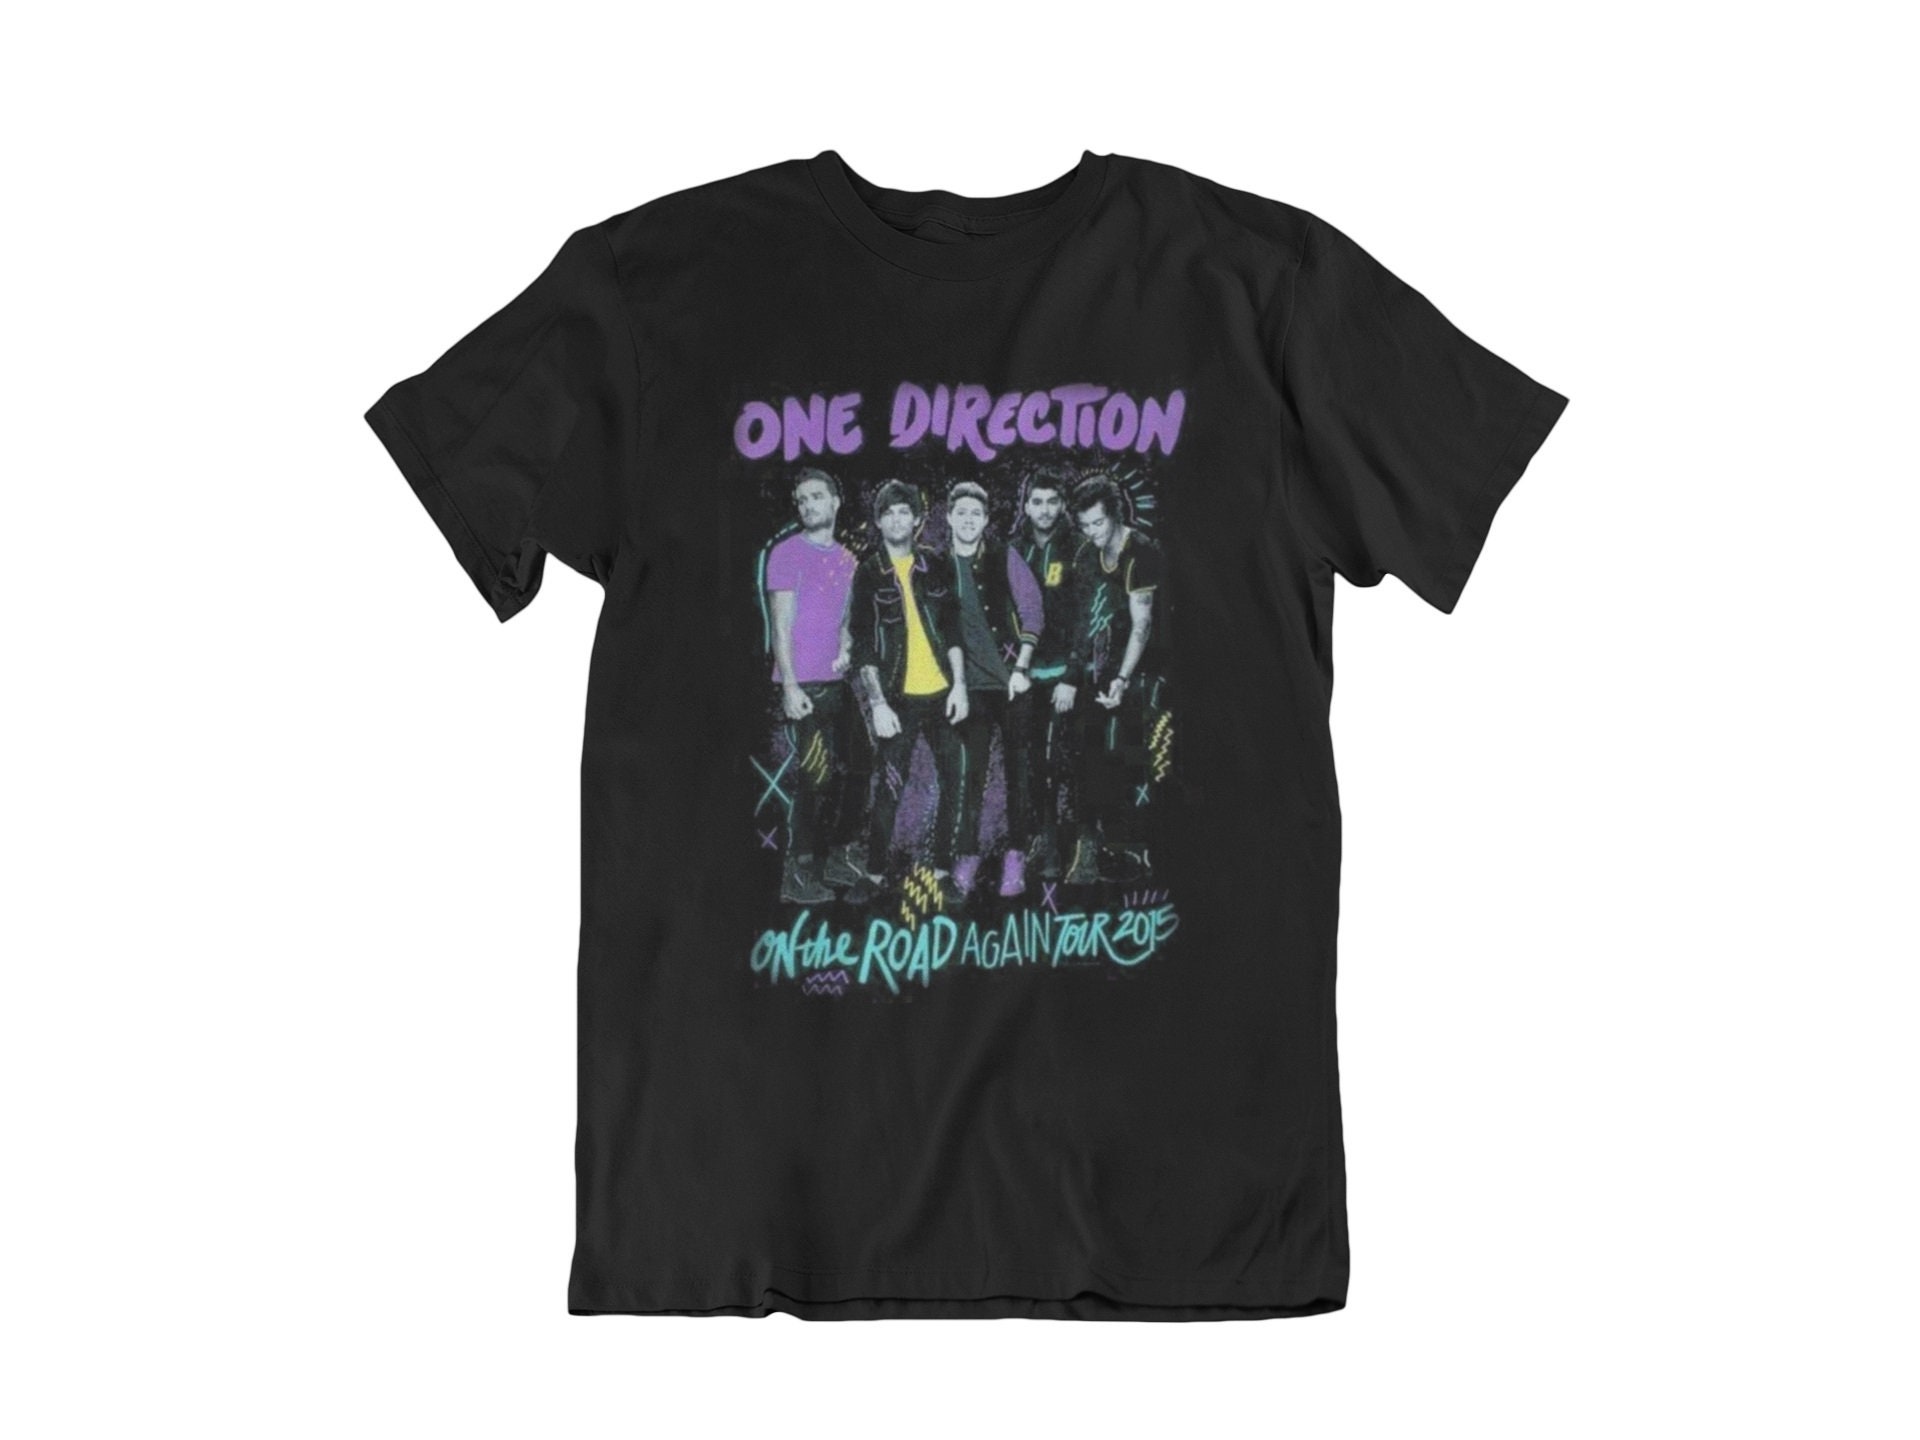 One Direction On the Road Again Tour 2015 Merch T-shirt